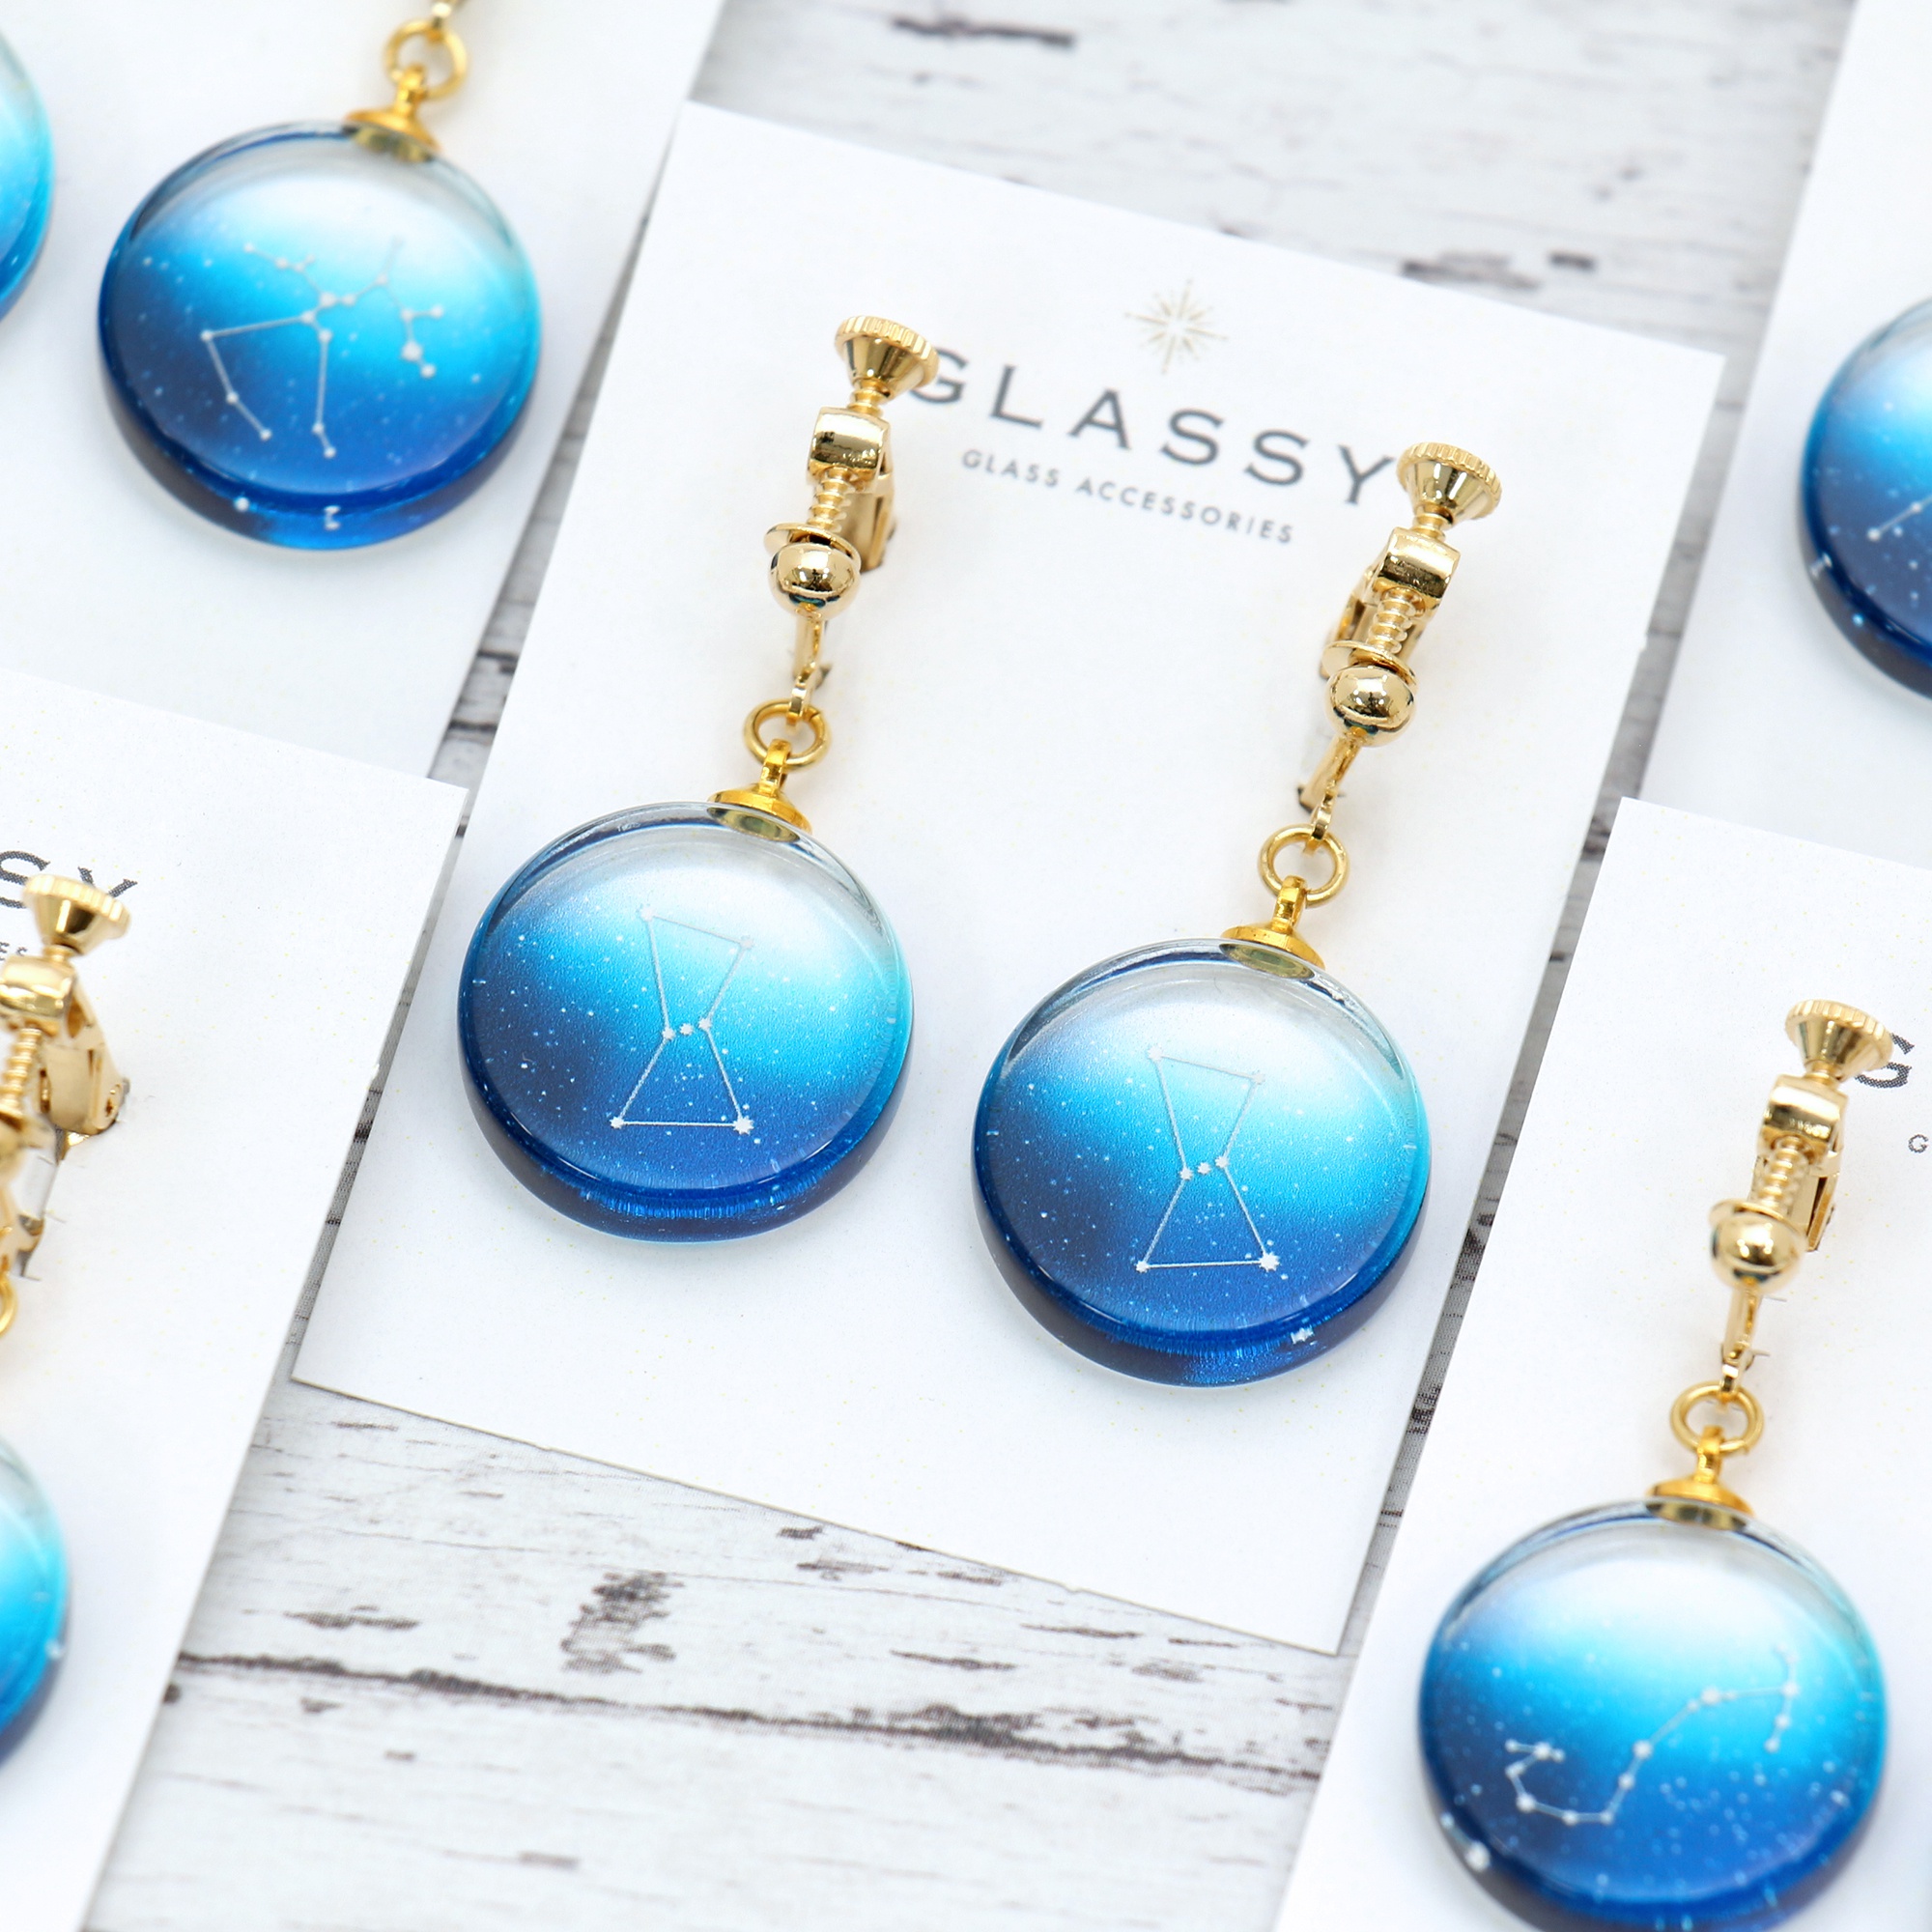 Glass accessories Earring CONSTELLATION Leo round shape